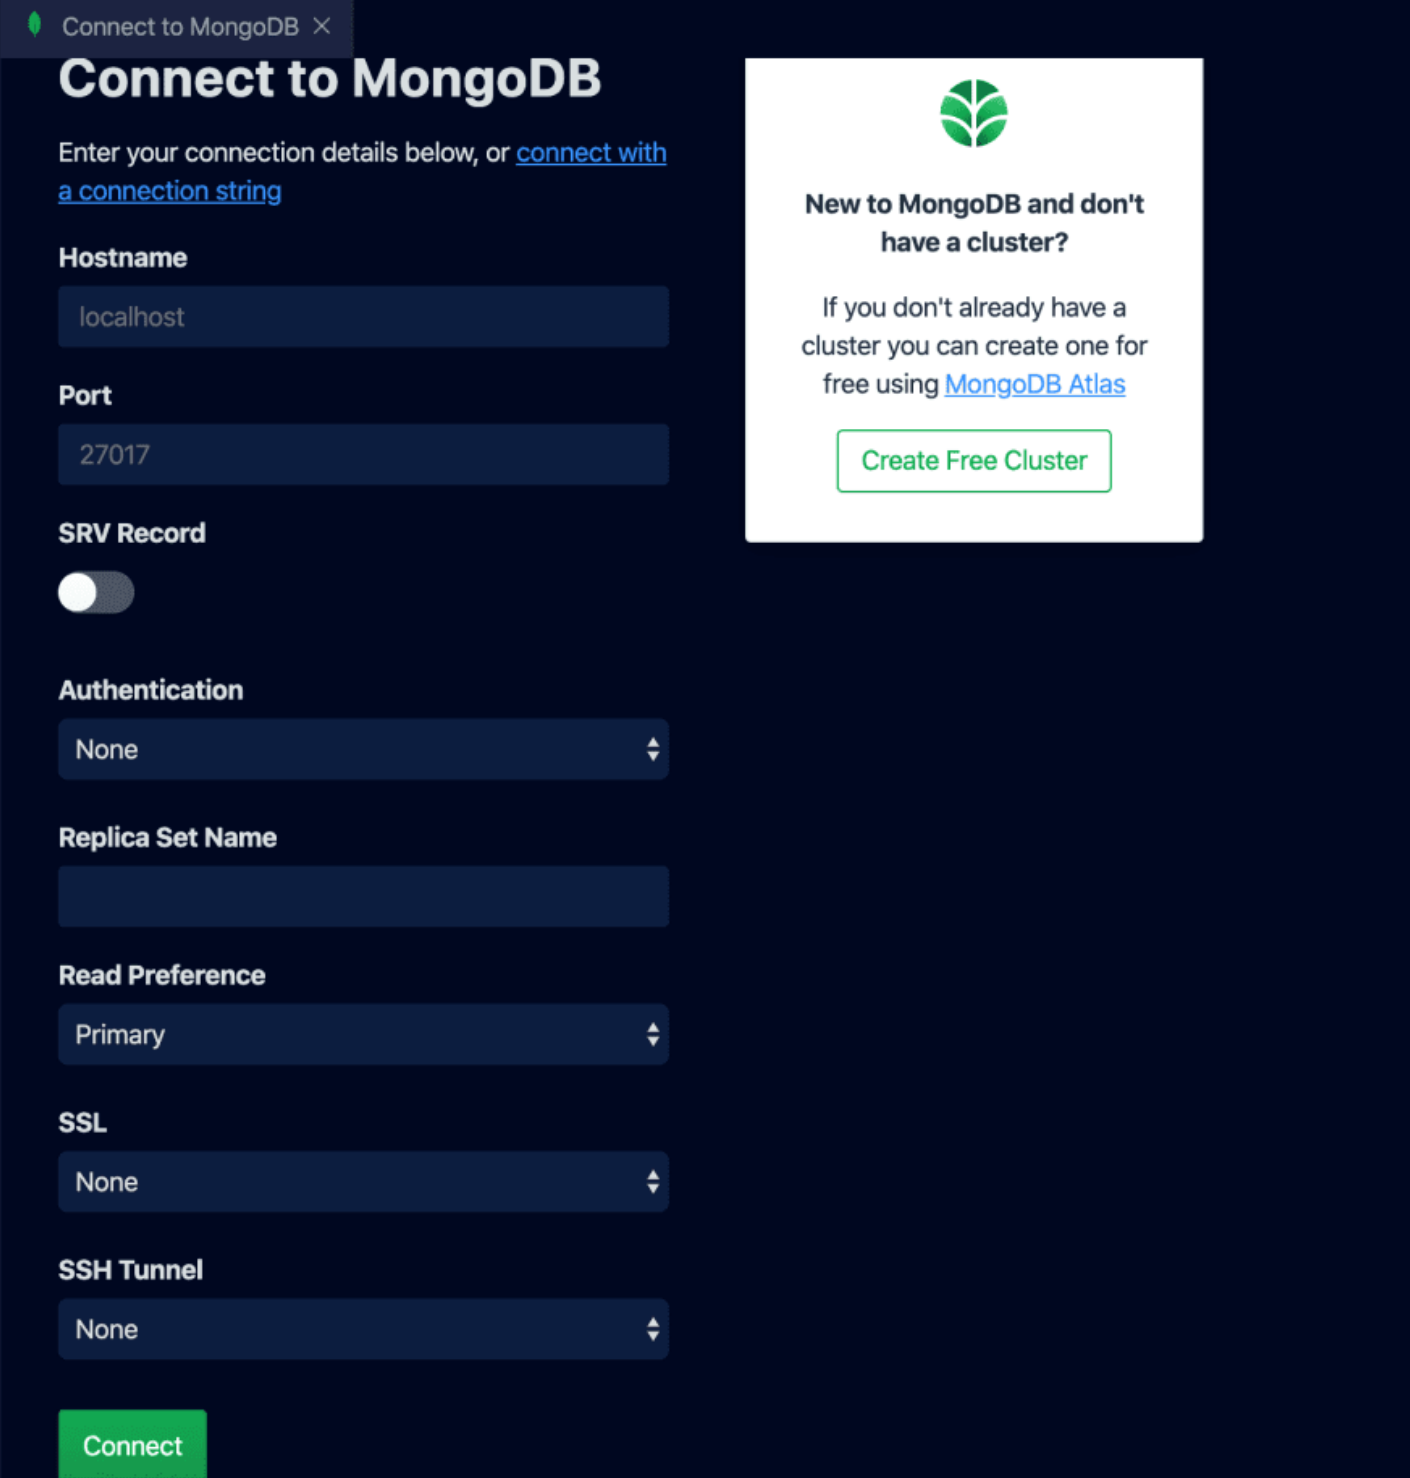 Screenshot of the 'Connect to MongoDB' screen in VS Code.